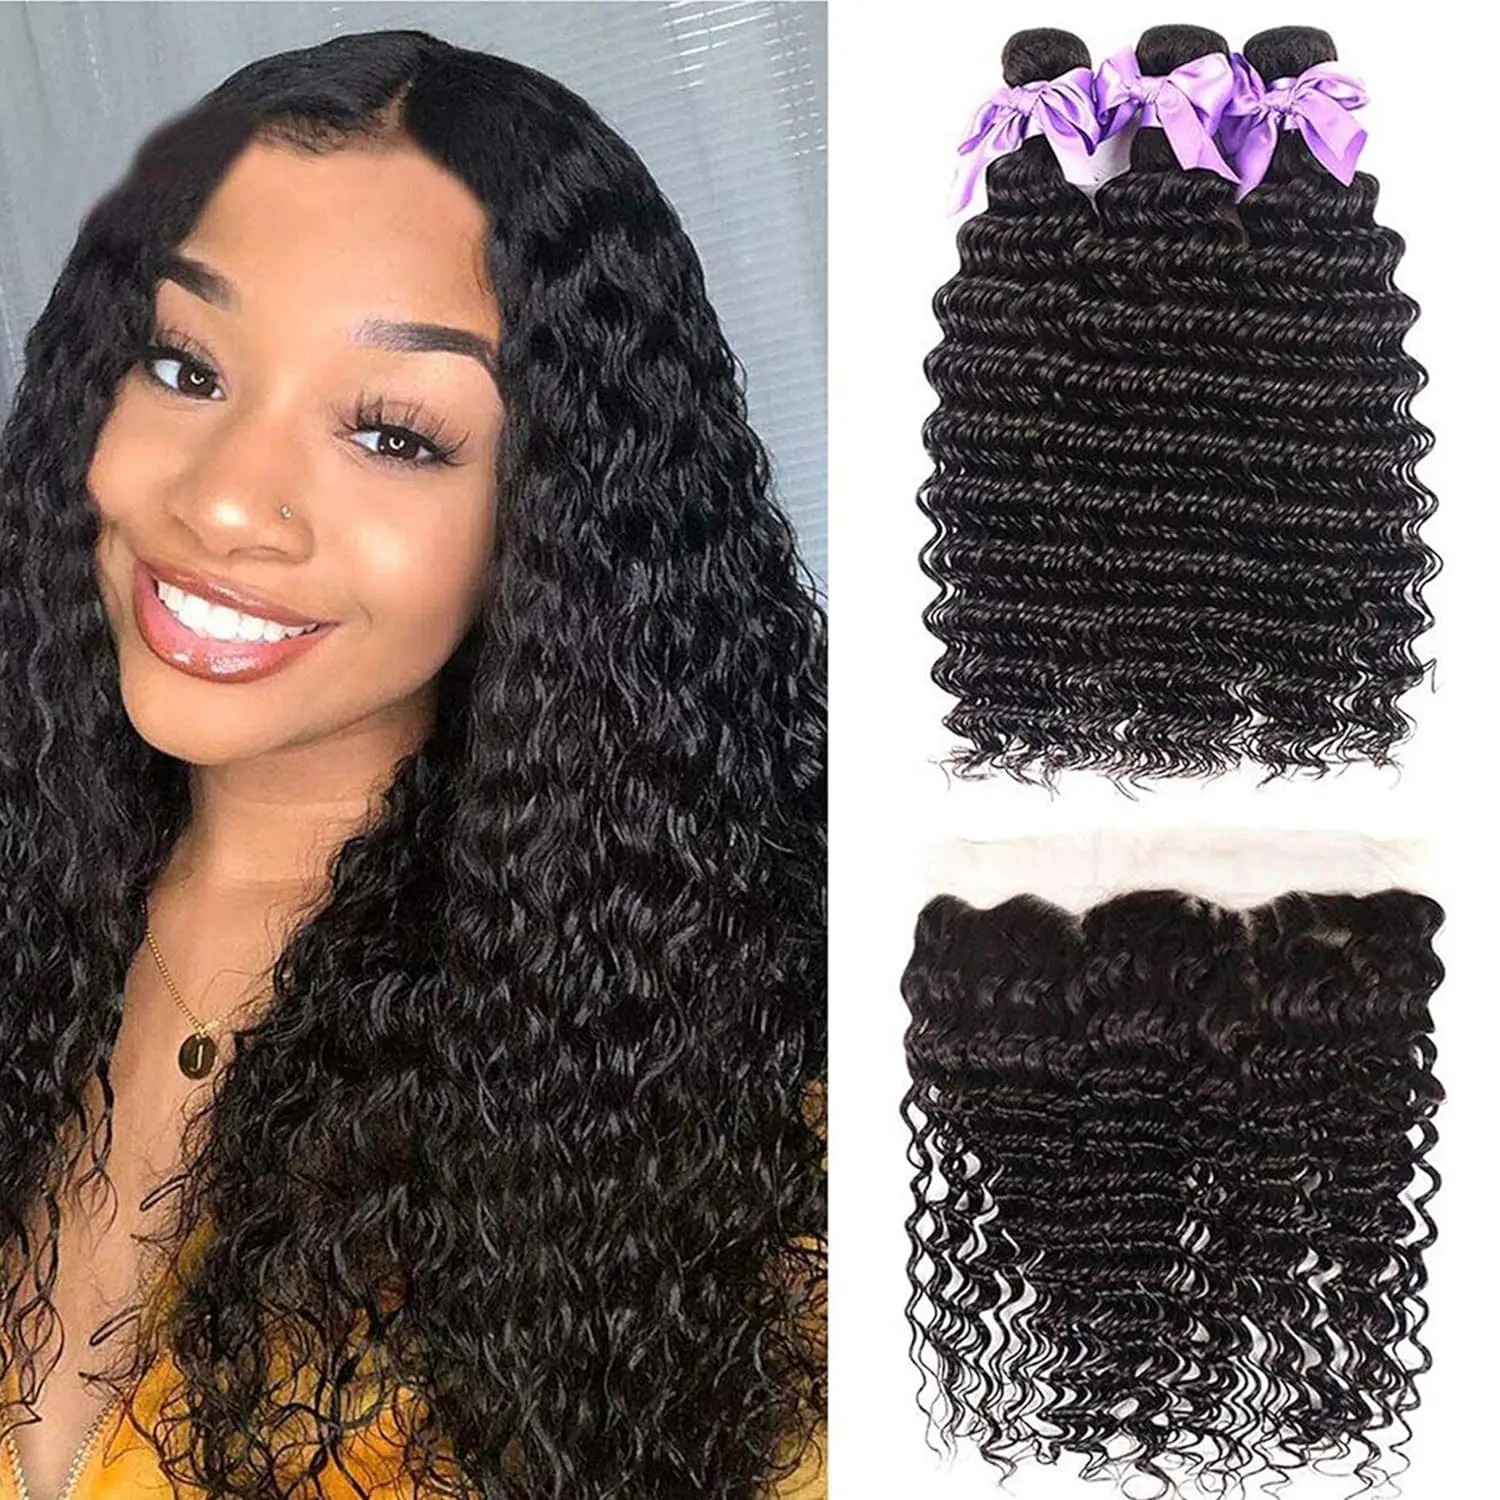 

Brazilian Deep Wave Bundles With Frontal 13x4 Free Part Lace Frontal 100% Unprocessed Virgin Human Hair Ear to Ear Lace Frontal